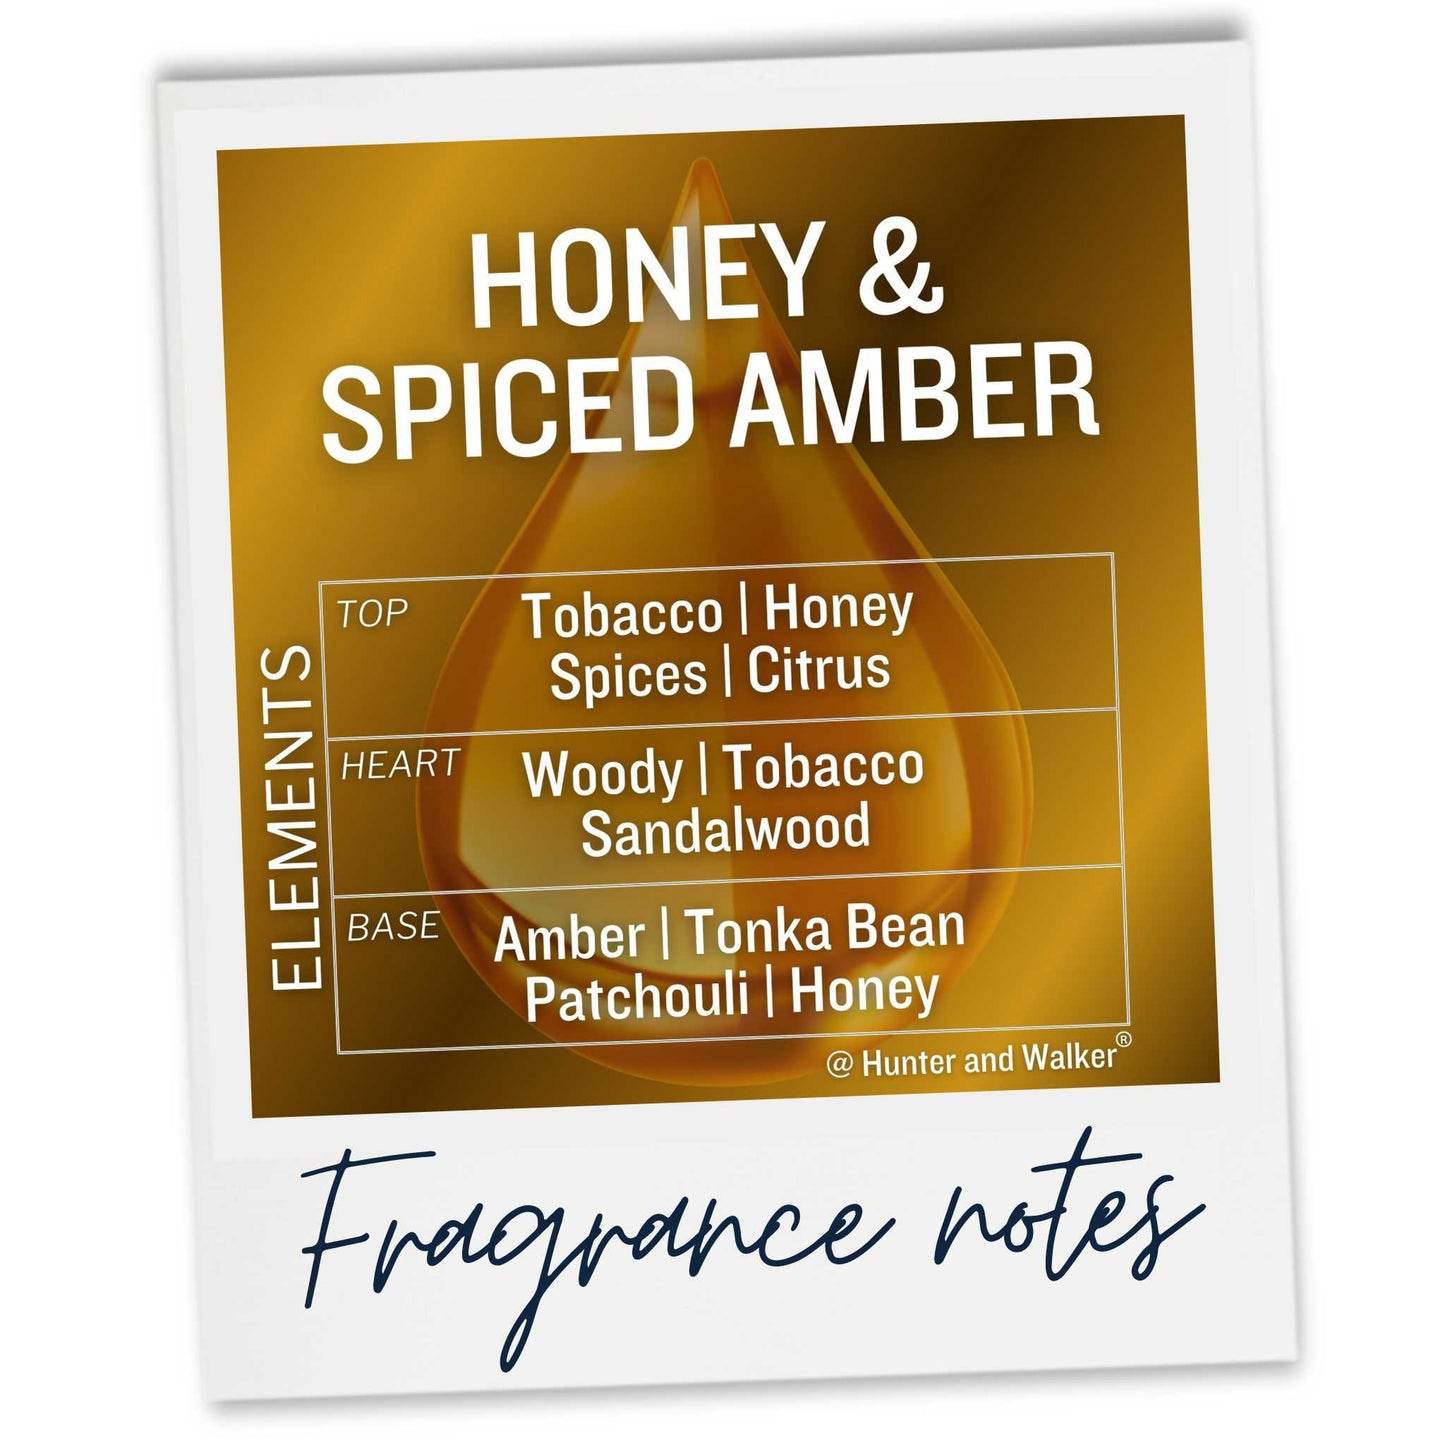 Honey and Spiced Amber wax melt sample fragrance notes